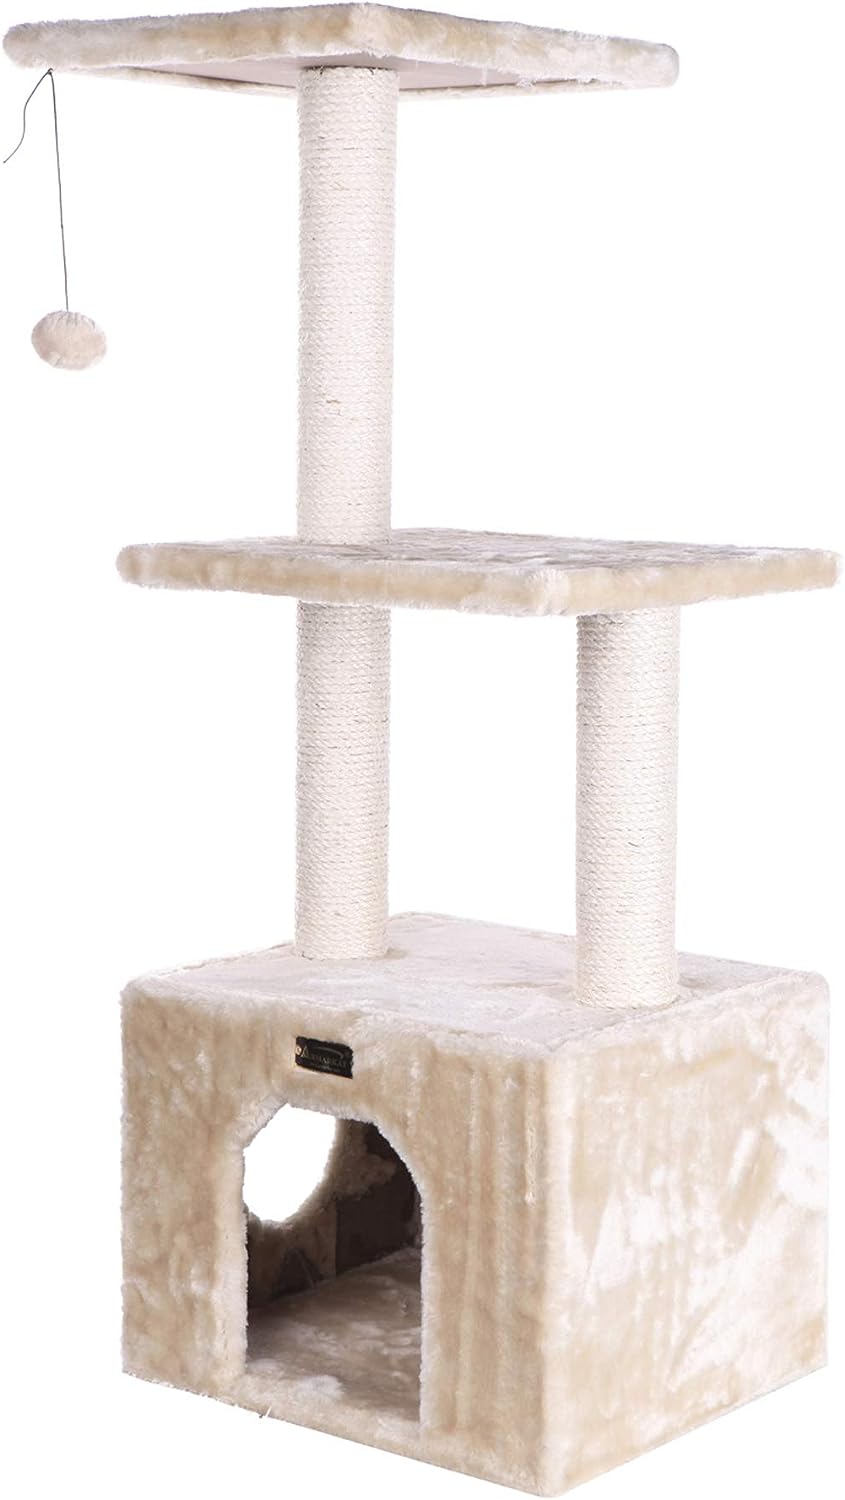 Armarkat 3-Tier Cat Tree Real Wood Furniture with Sisal Scartching Post, Beige, 16""(l) x 14""(w) x 39""(h) (A3902)